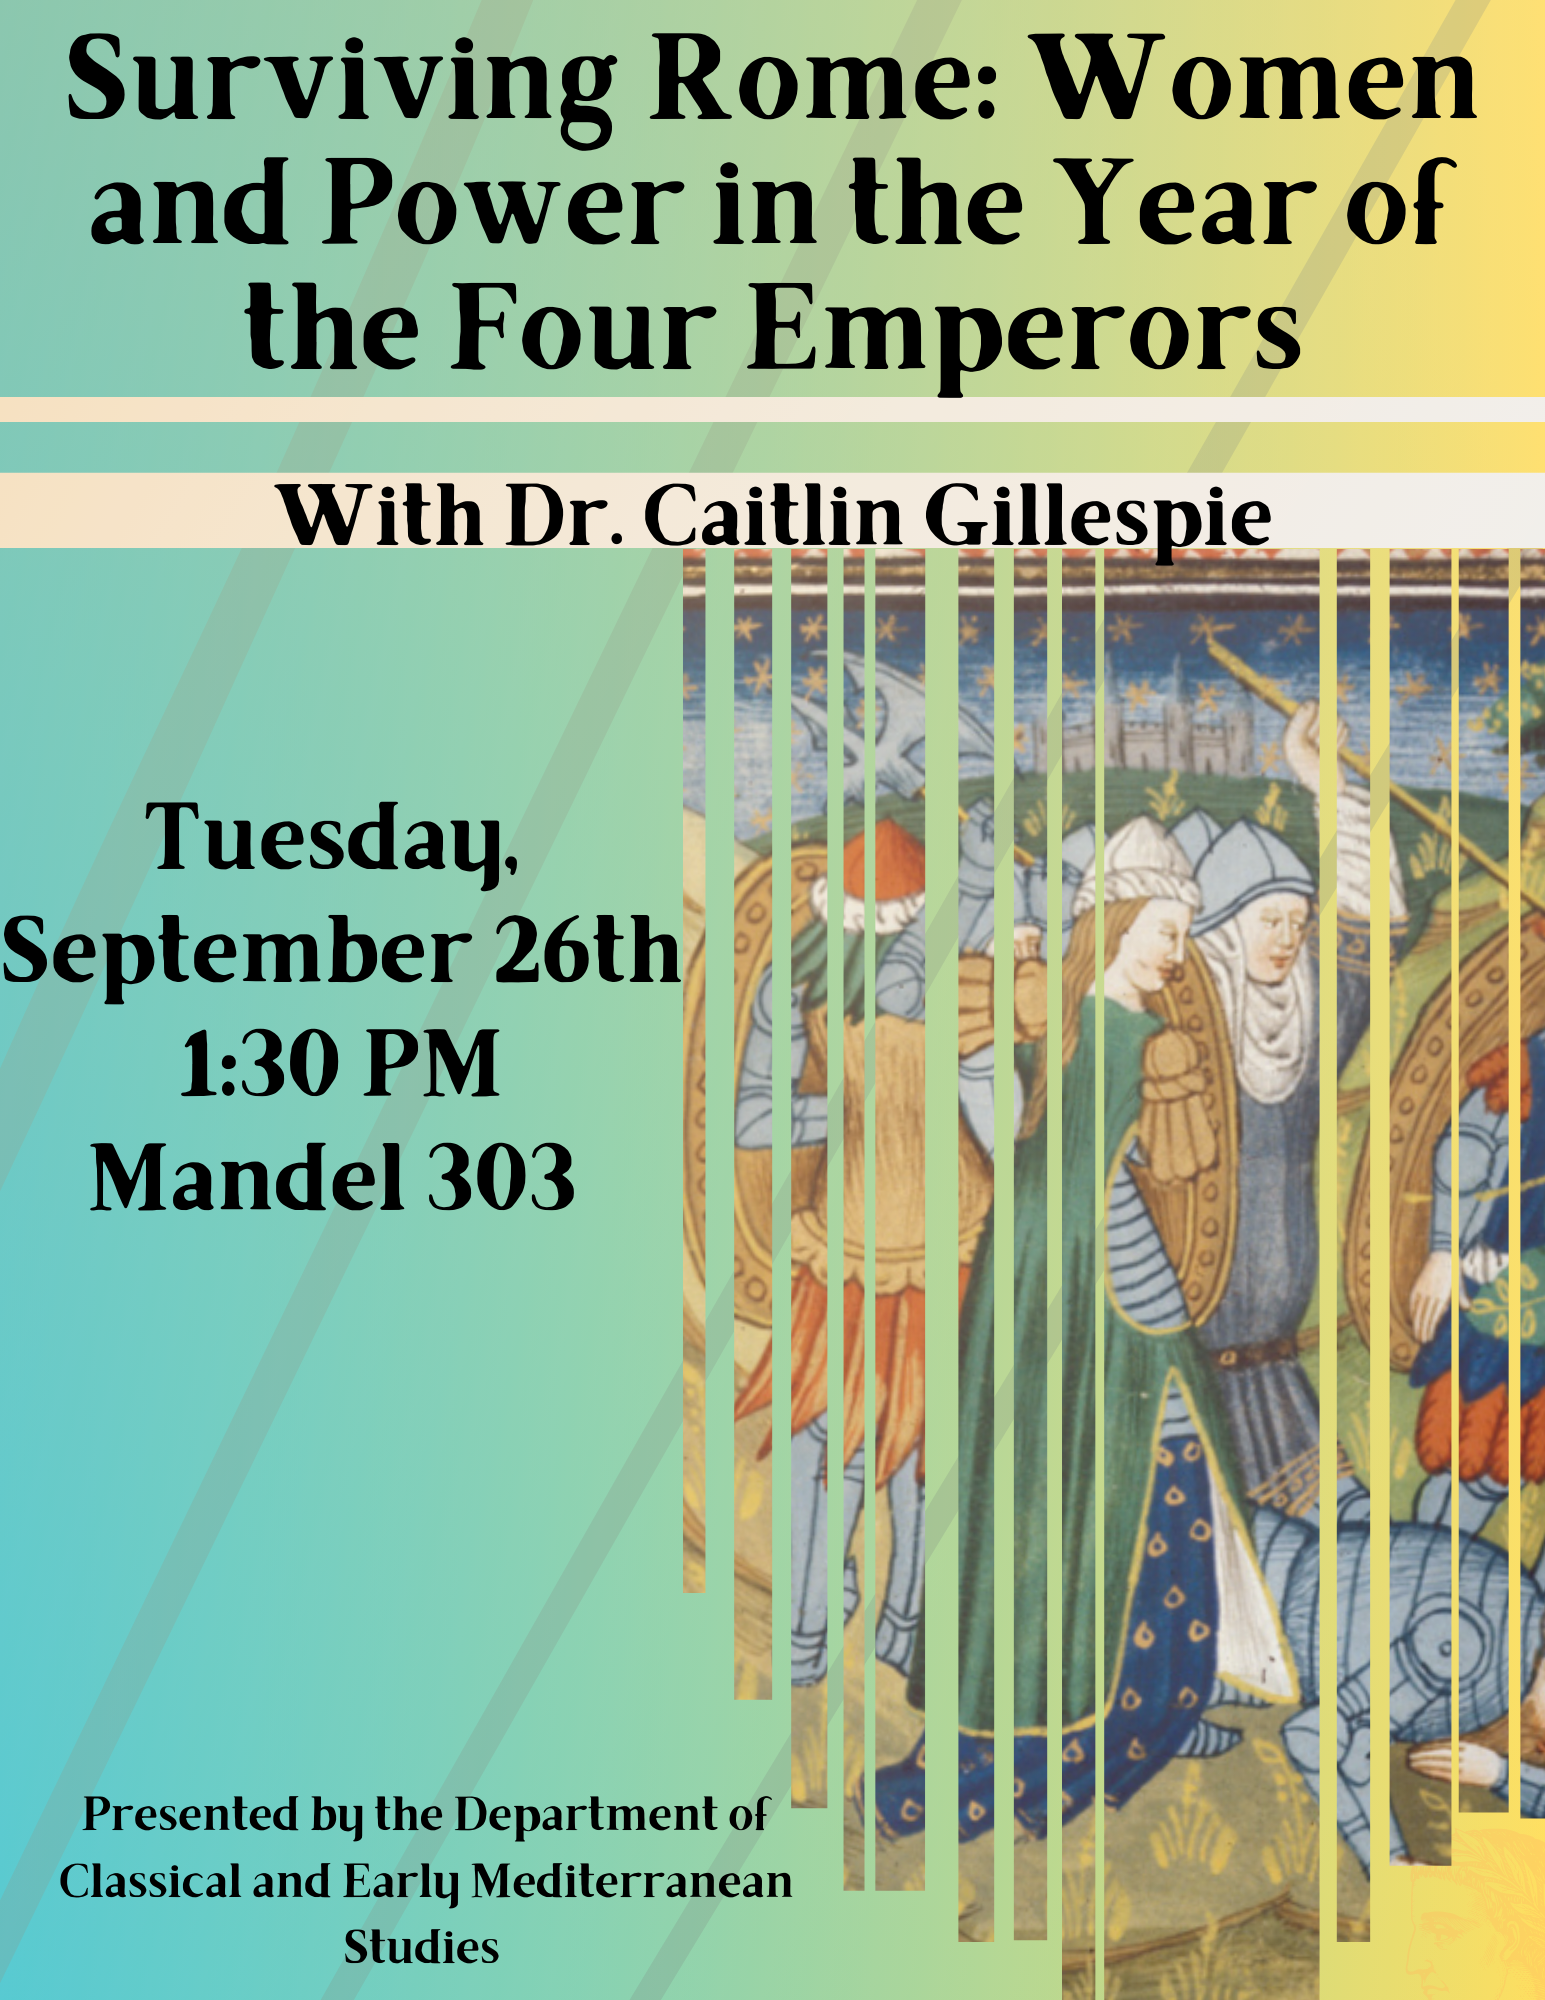 Surviving Rome: Women and Power in the Year of the Four Emperors. With Dr. Caitlin Gillespie. On Tuesday, September 26th, at 1:30 PM, in 303 Mandel.